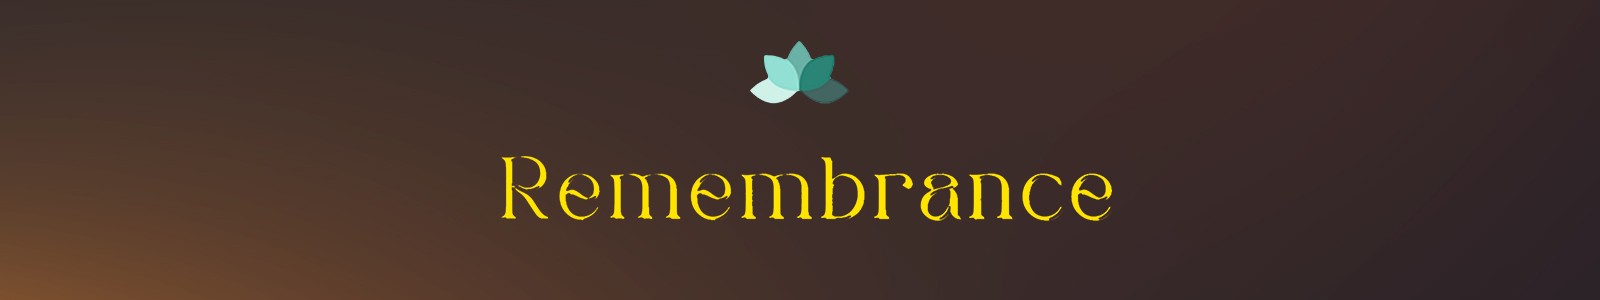 Remembrance by ZenDAW